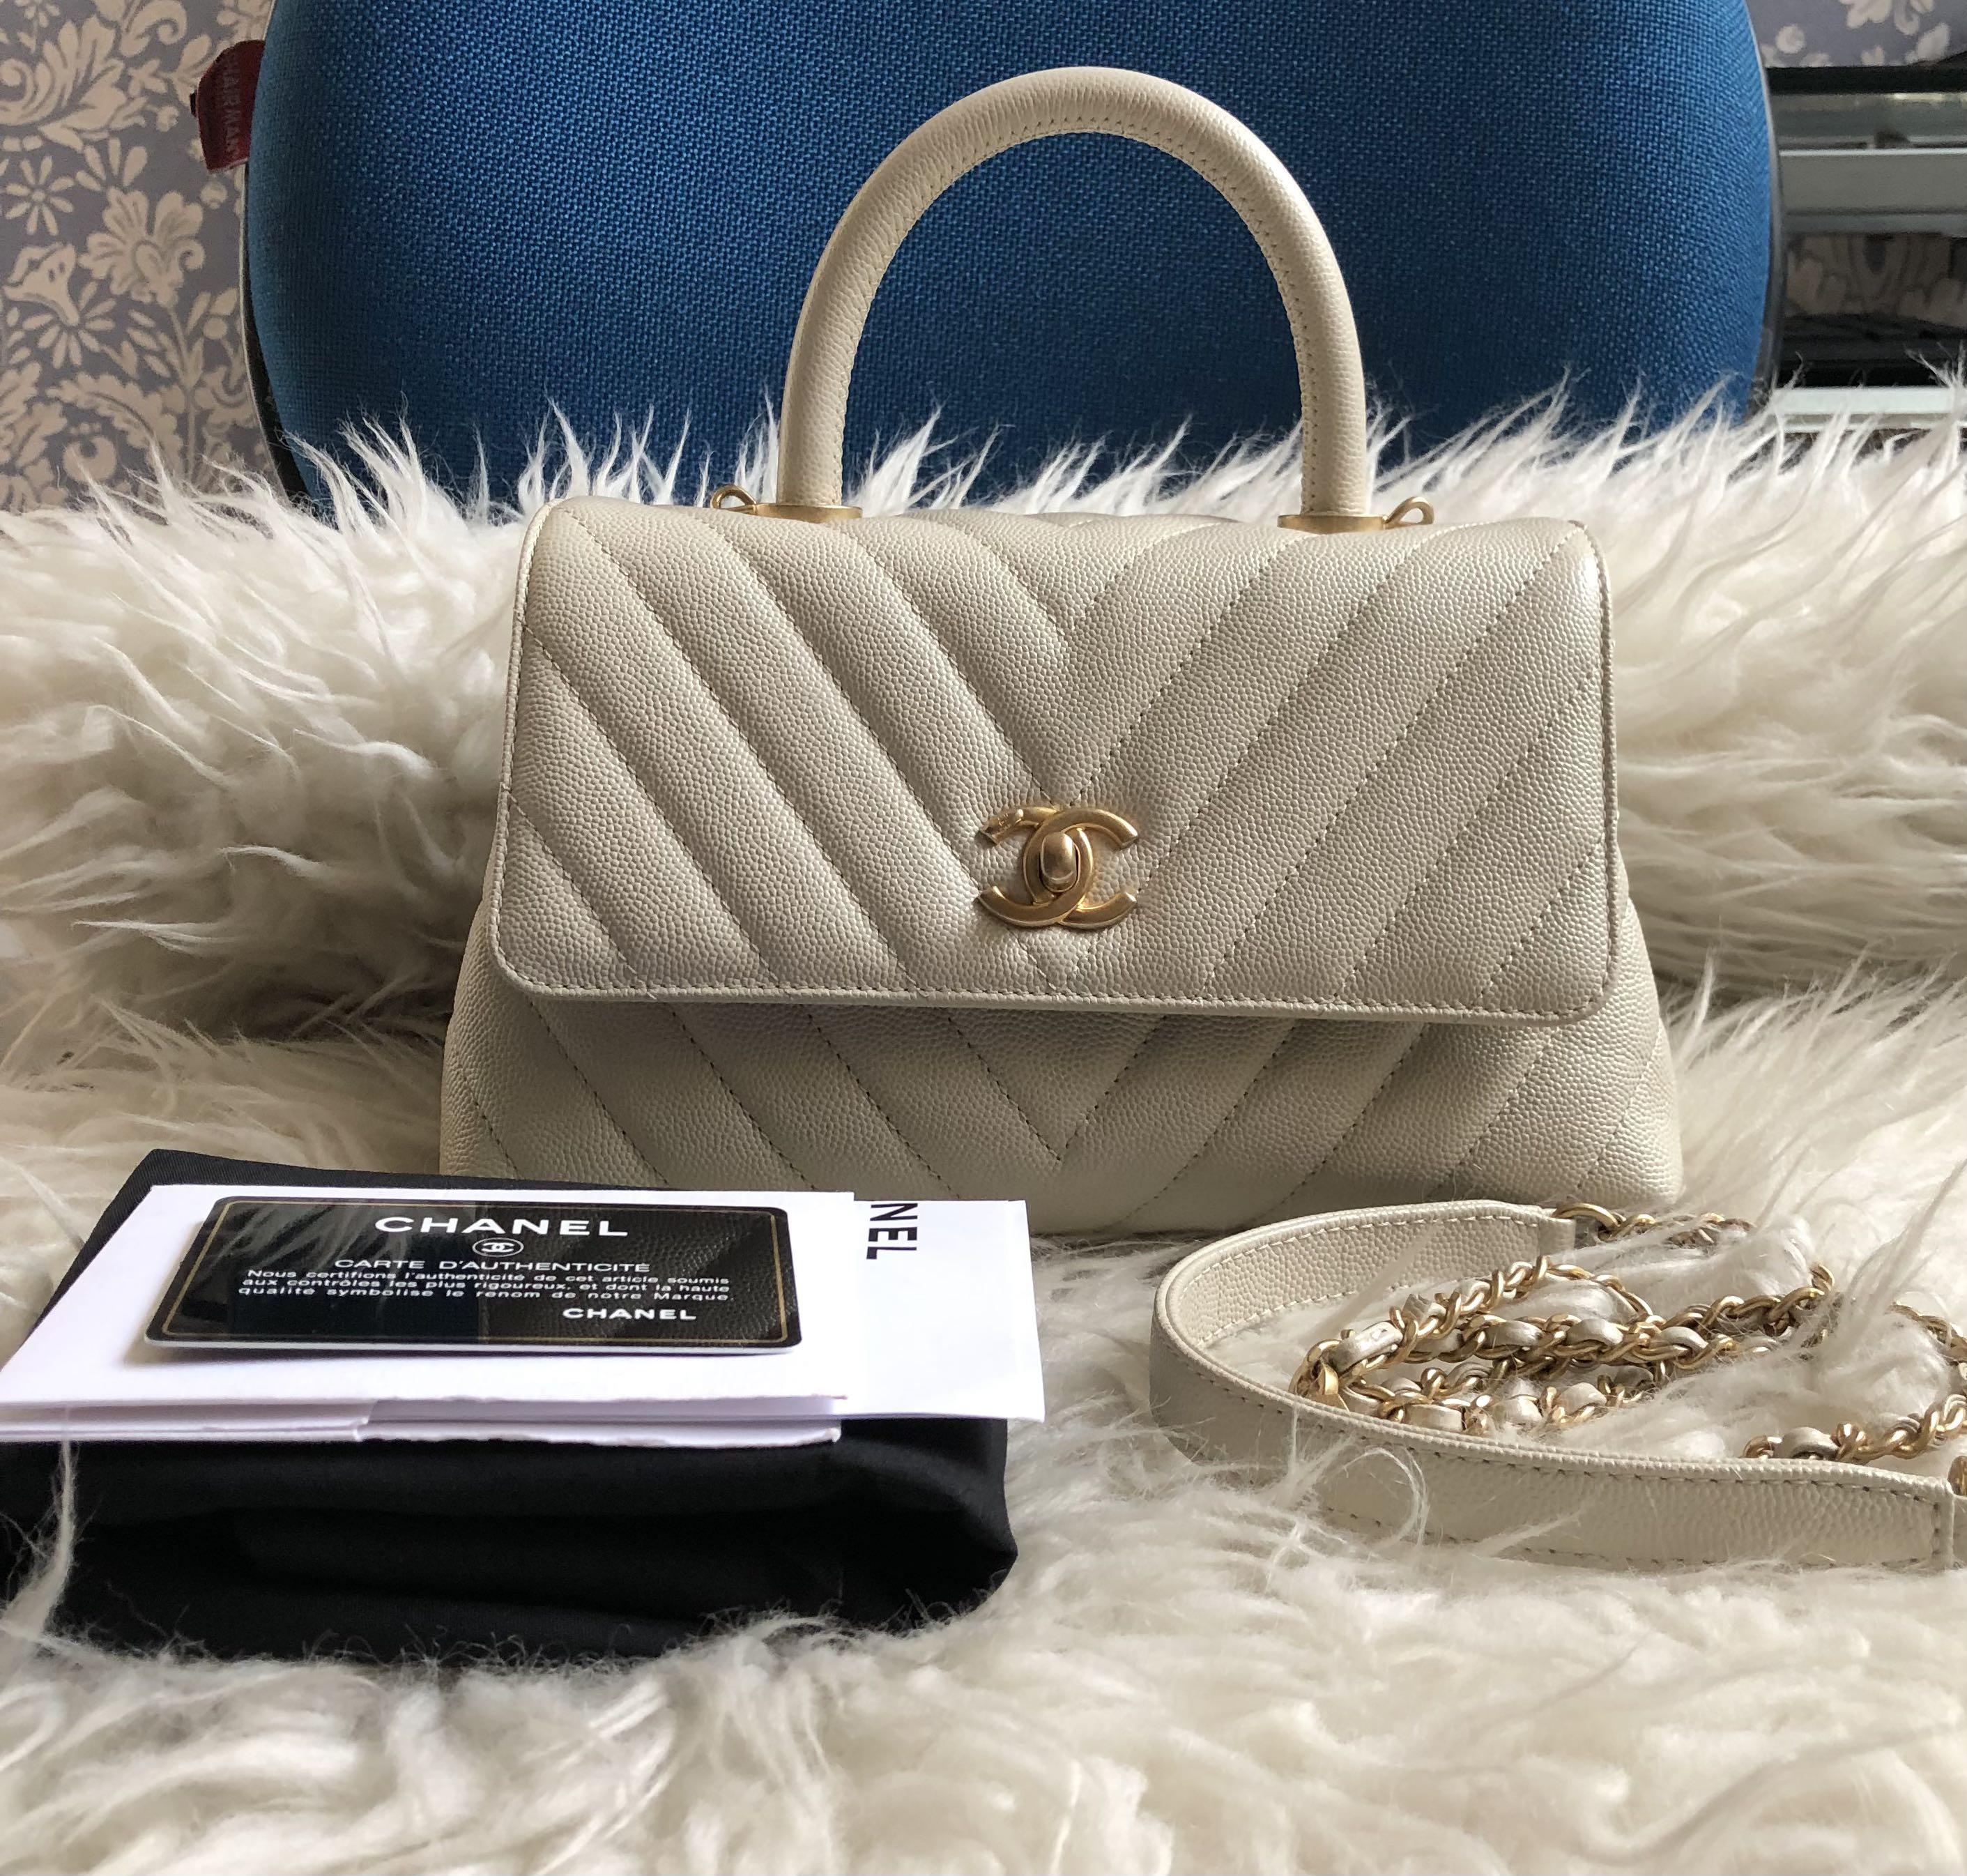 Chanel Ivory Calfskin and Lizard Small Coco Handle Bag